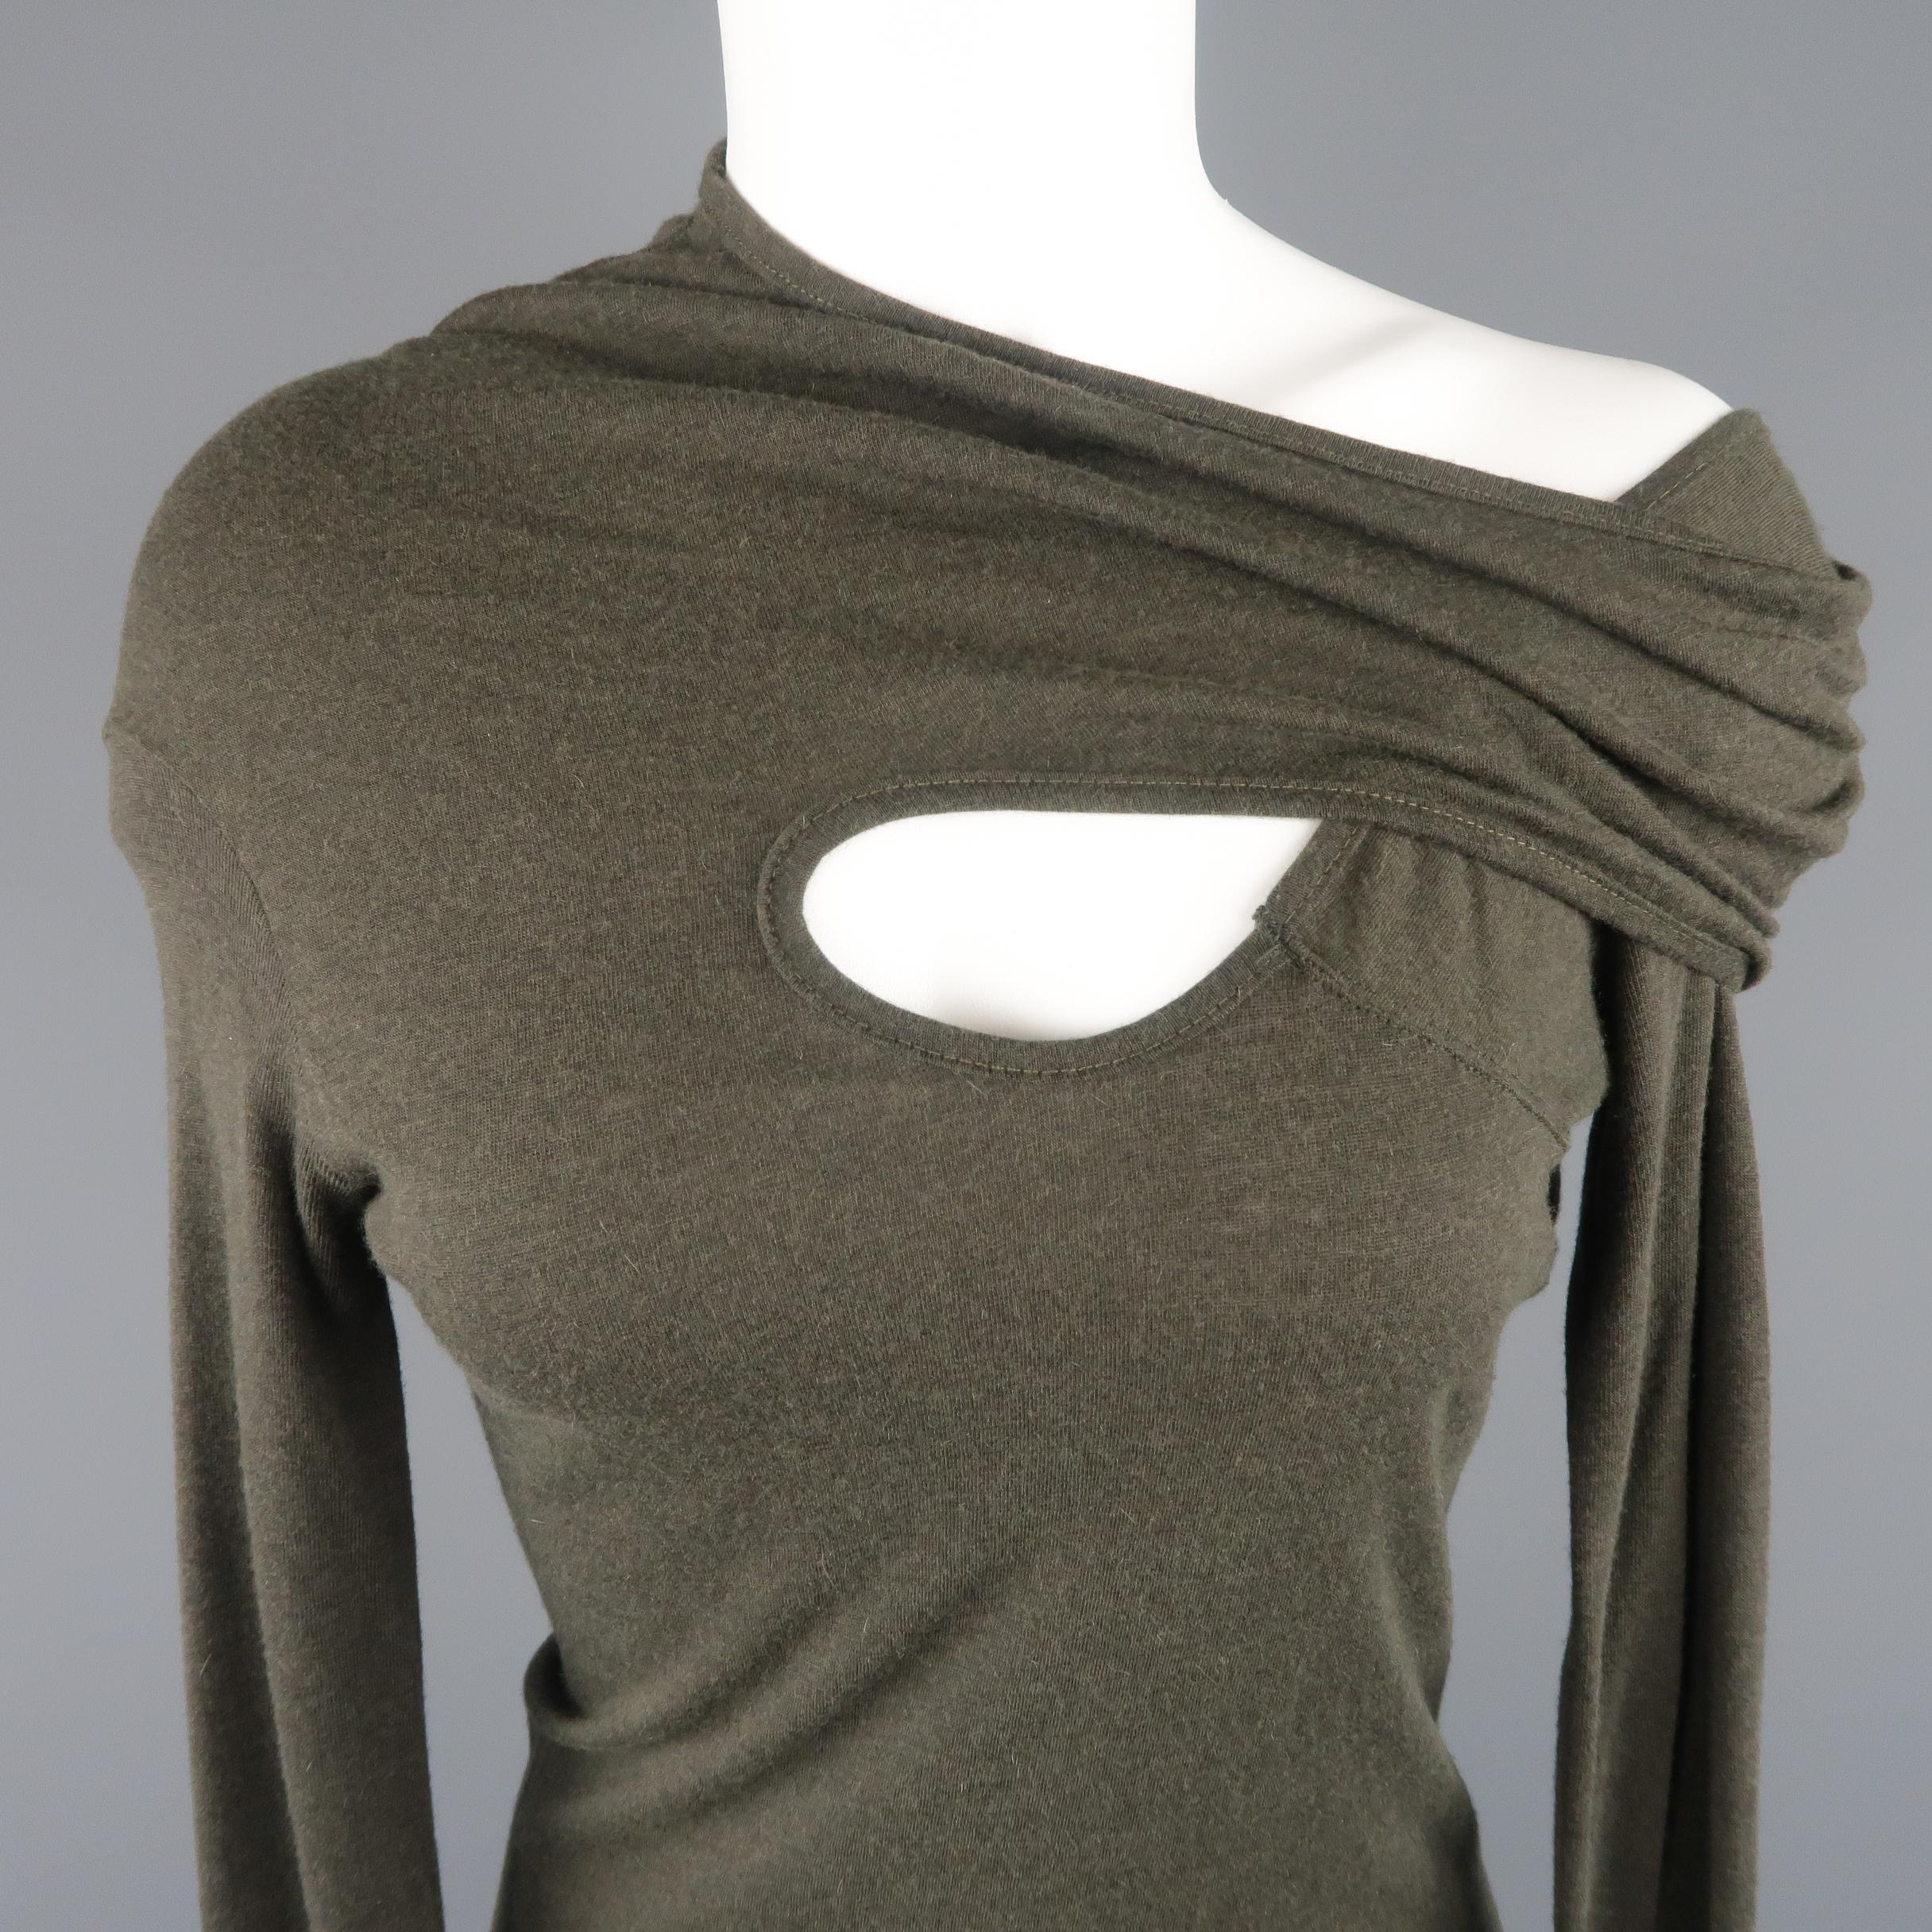 RICK OWENS top comes in olive green jersey with long sleeves and a curved cutout neckline with wrap over shoulder panel. Made in Italy.
 
New with Tags.
Marked: 40
 
Measurements:
 
Shoulder: 16 in.
Bust: 34 in.
Sleeve: 29 in.
Length: 26 in.